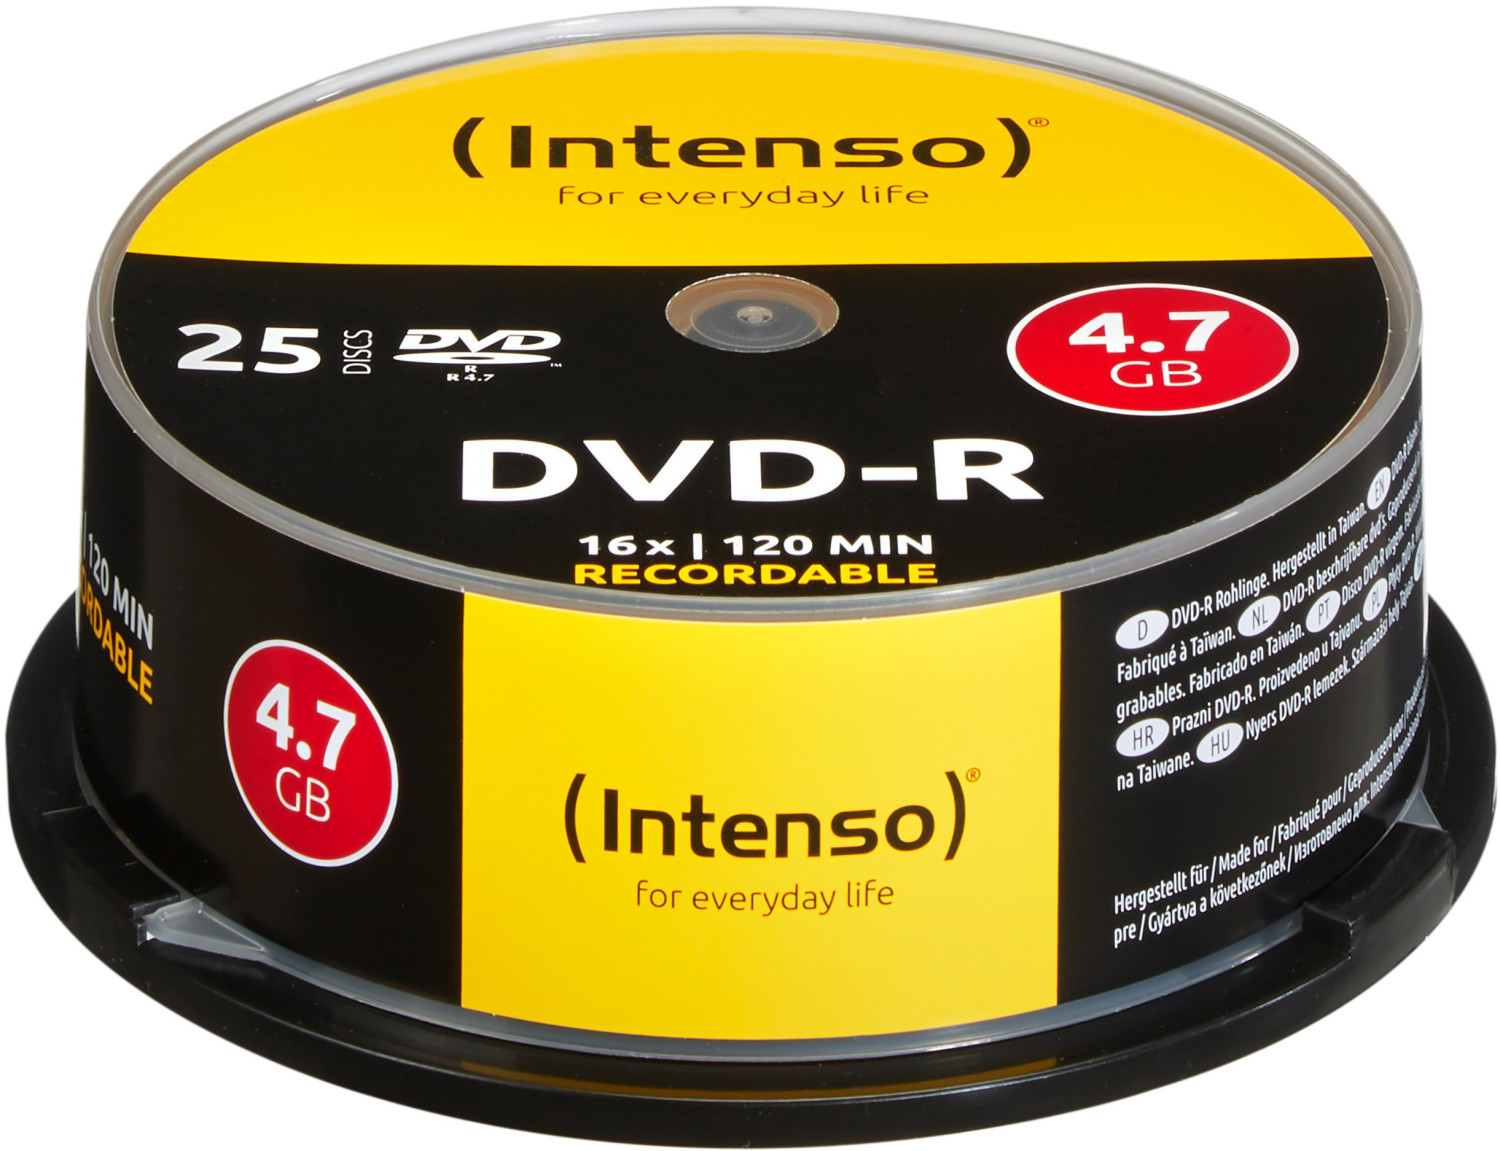 Photos - Other for Computer Intenso DVD-R 4,7GB 120min 16x 25pk Spindle 